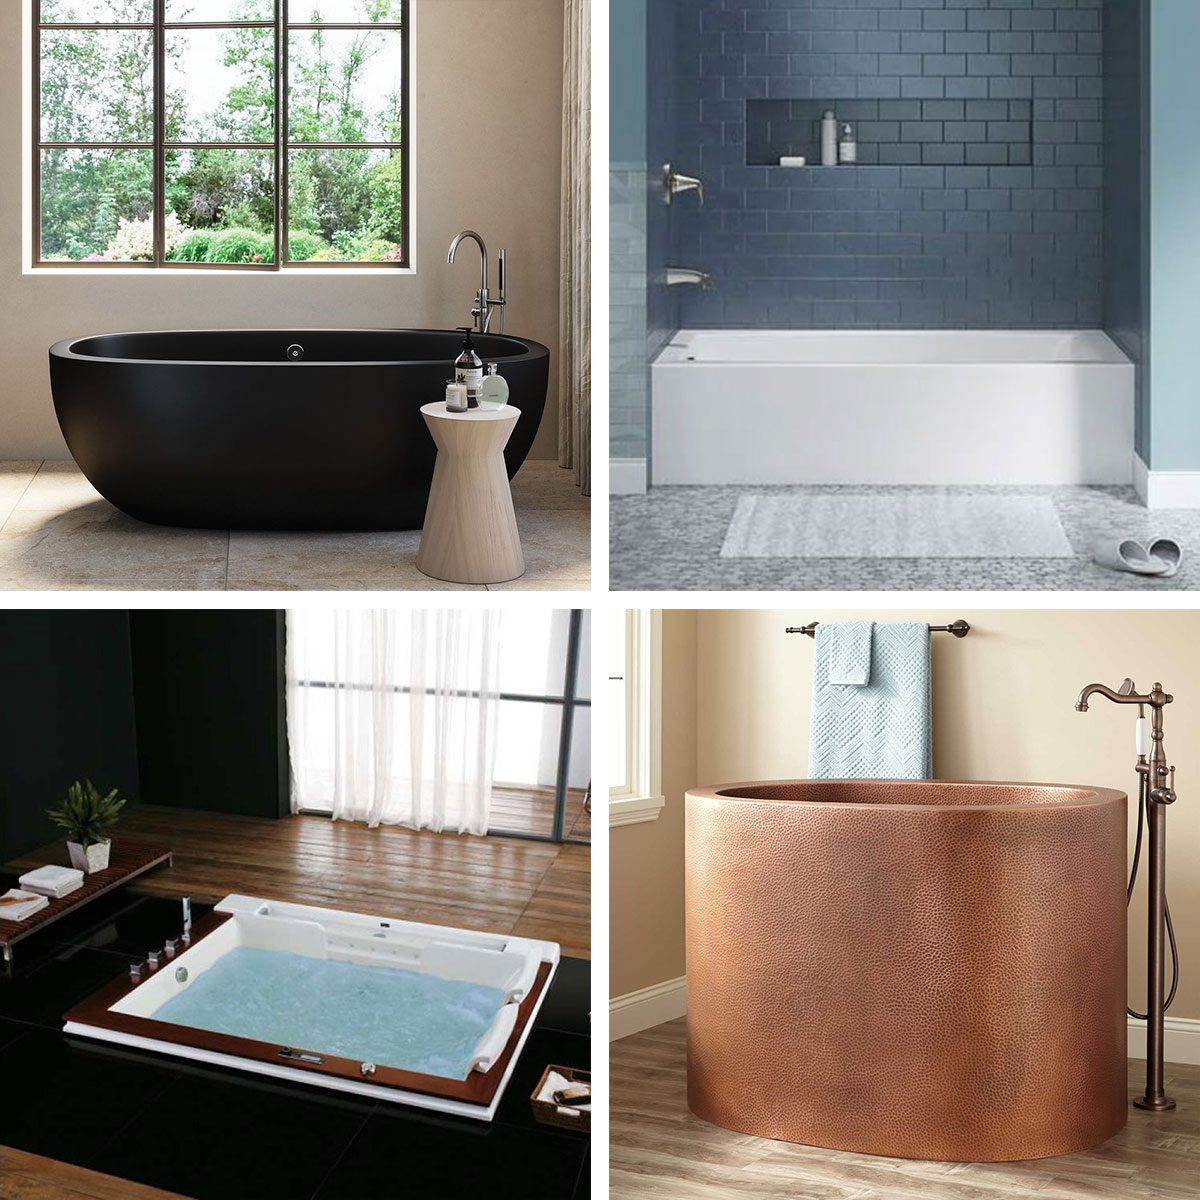 Best Bathtubs To For Your Bathroom, Which Brand Of Bathtub Is Best